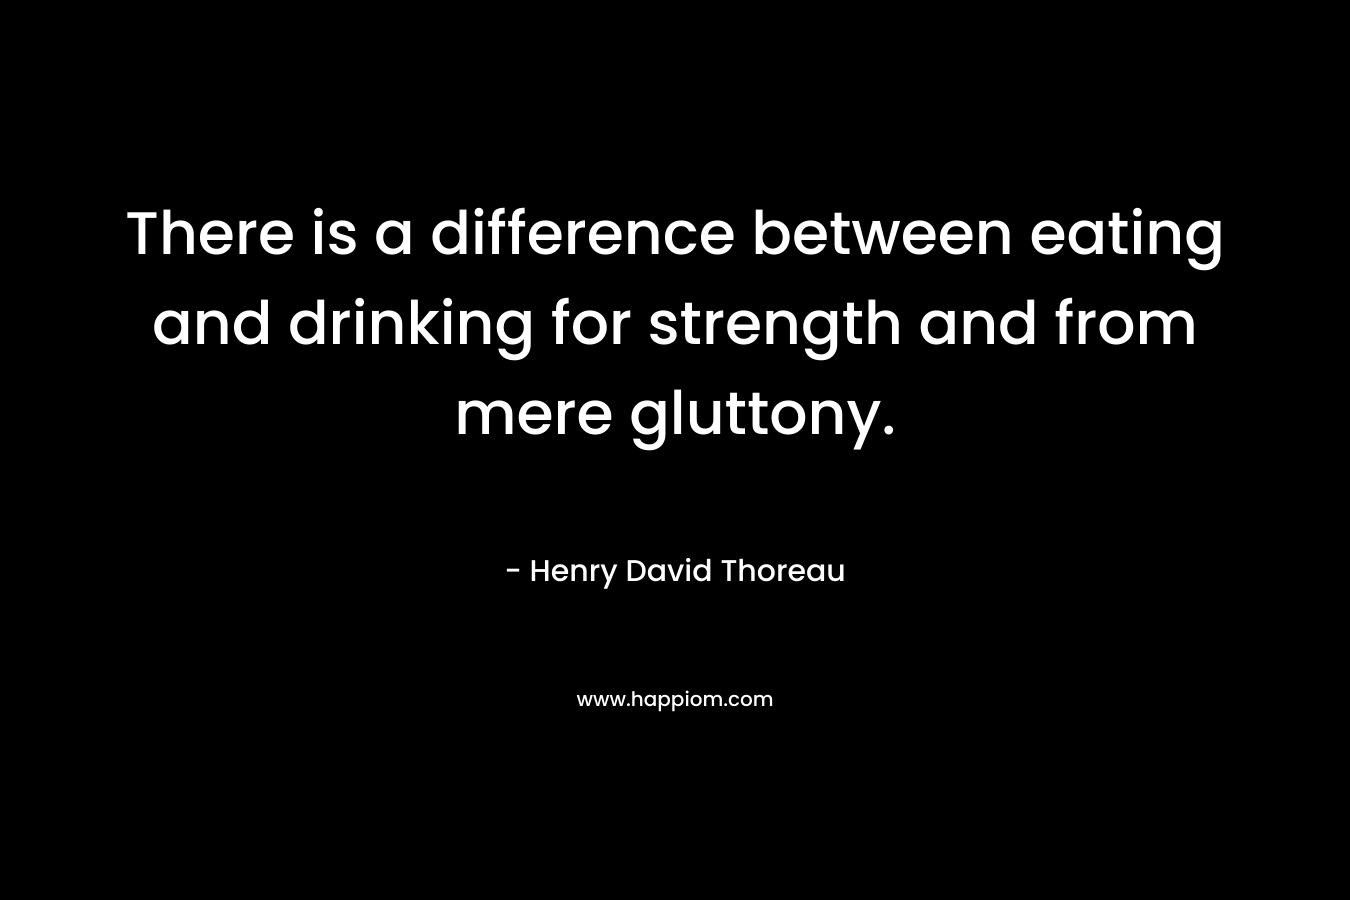 There is a difference between eating and drinking for strength and from mere gluttony. – Henry David Thoreau